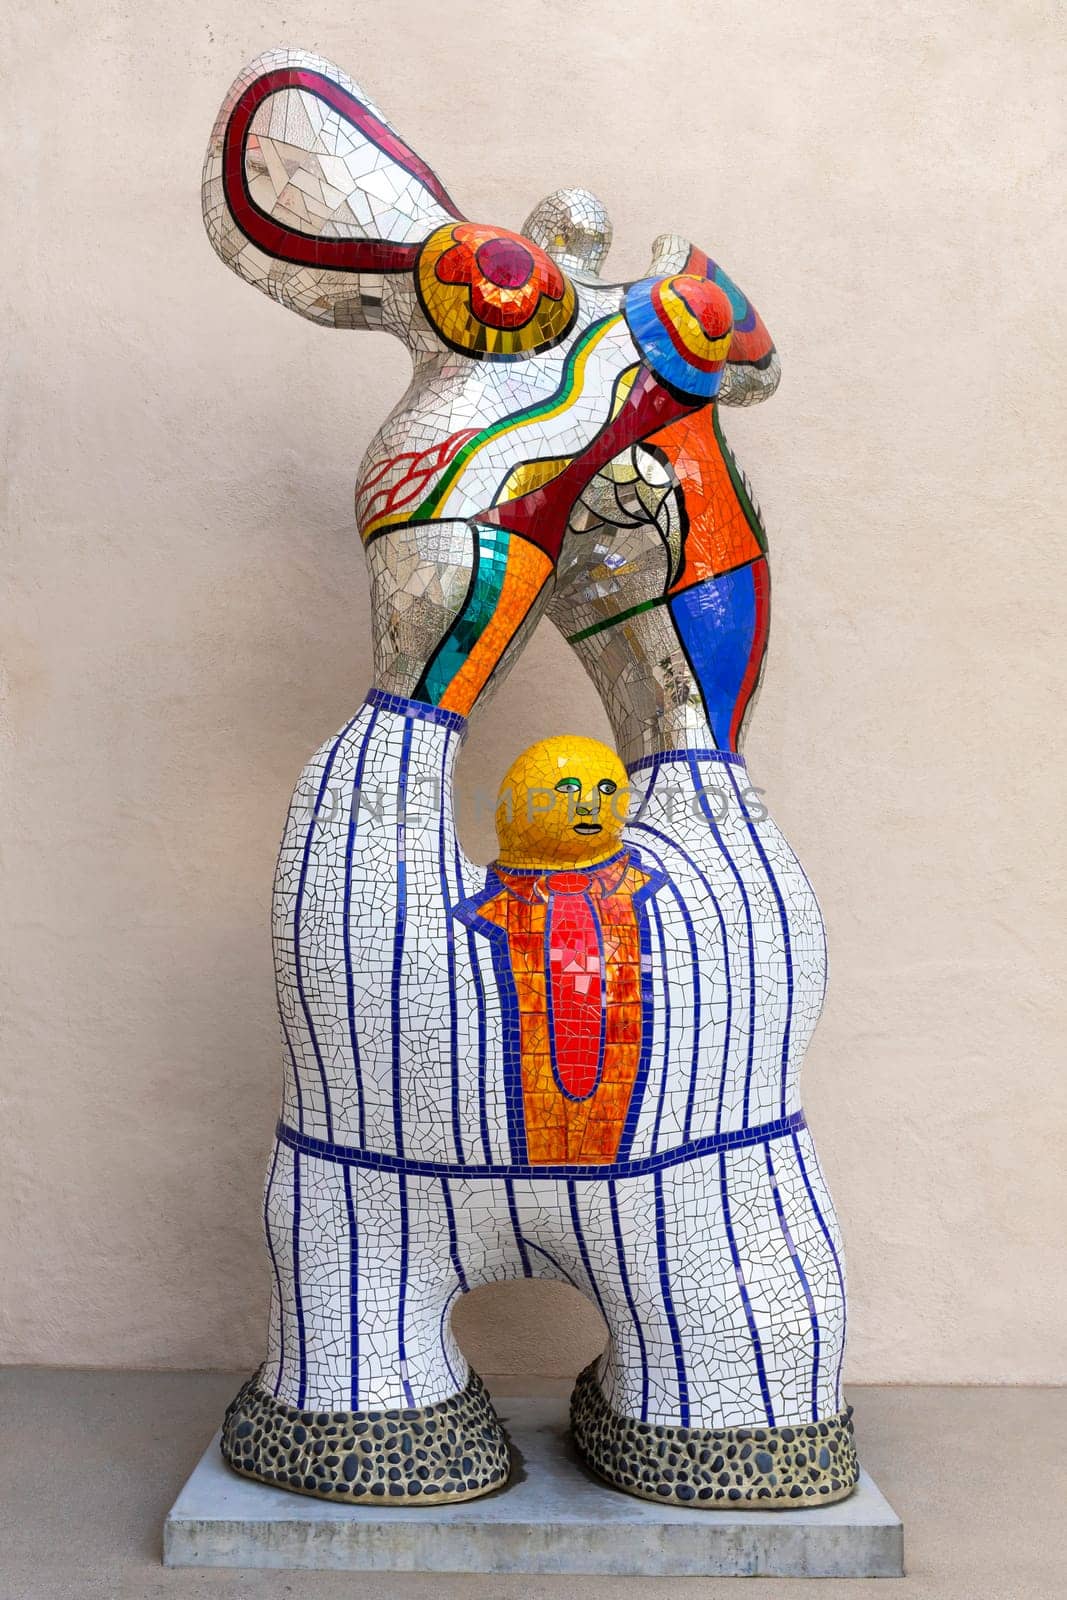 Colorful Mosaic Sculpture Poet and Muse Near Mingei Museum, Balboa Park Created By French American Sculptor Niki De Saint Phalle. Vertical Plane. San Diego, Usa. March 13, 2024